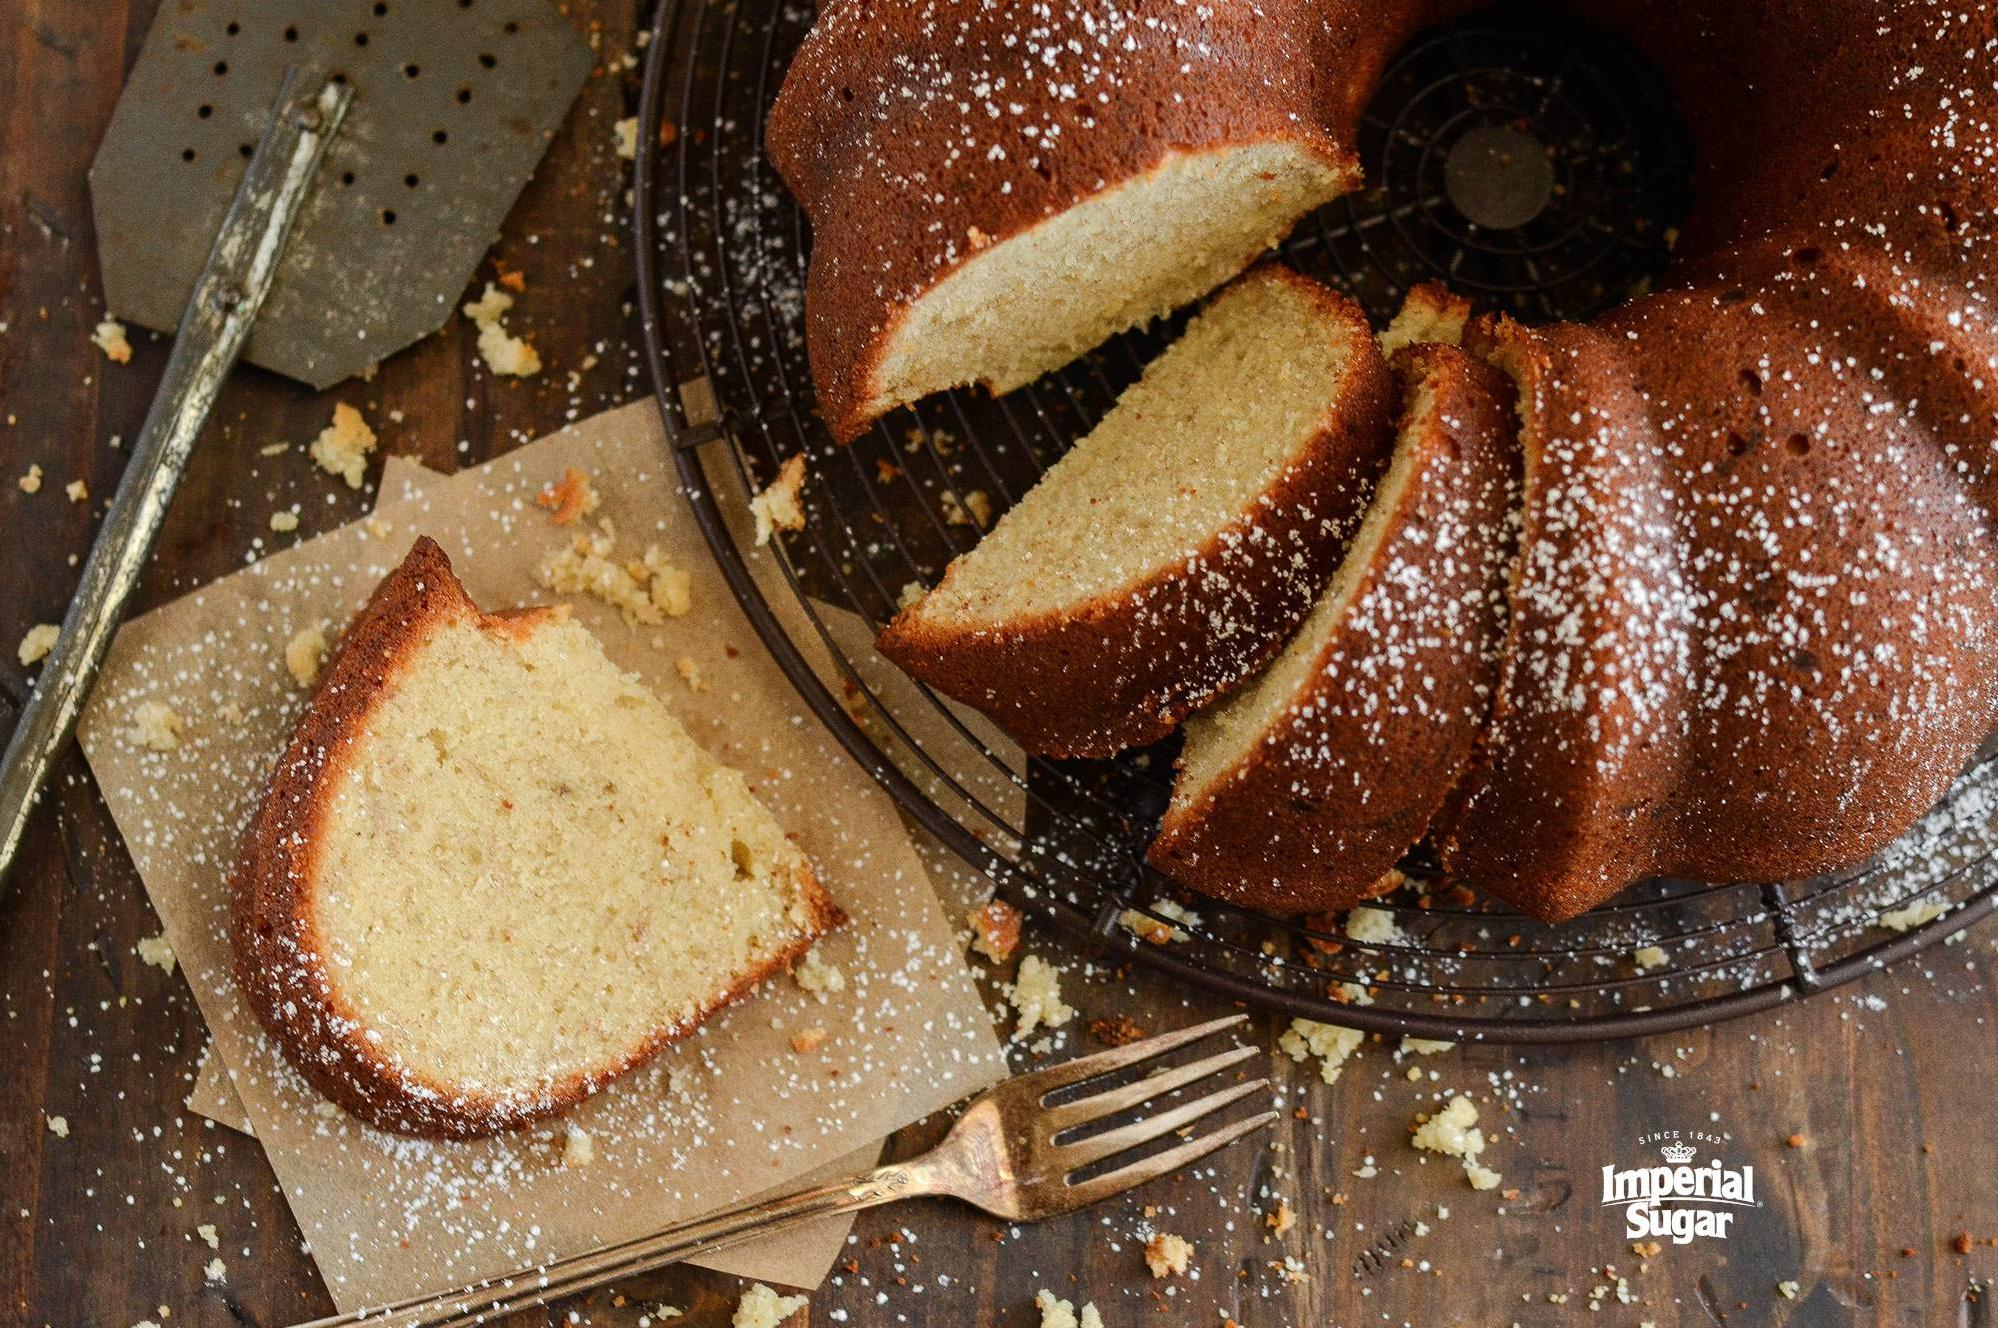  Brown sugar gives this cake an extra depth of flavor and a touch of caramel-like sweetness.